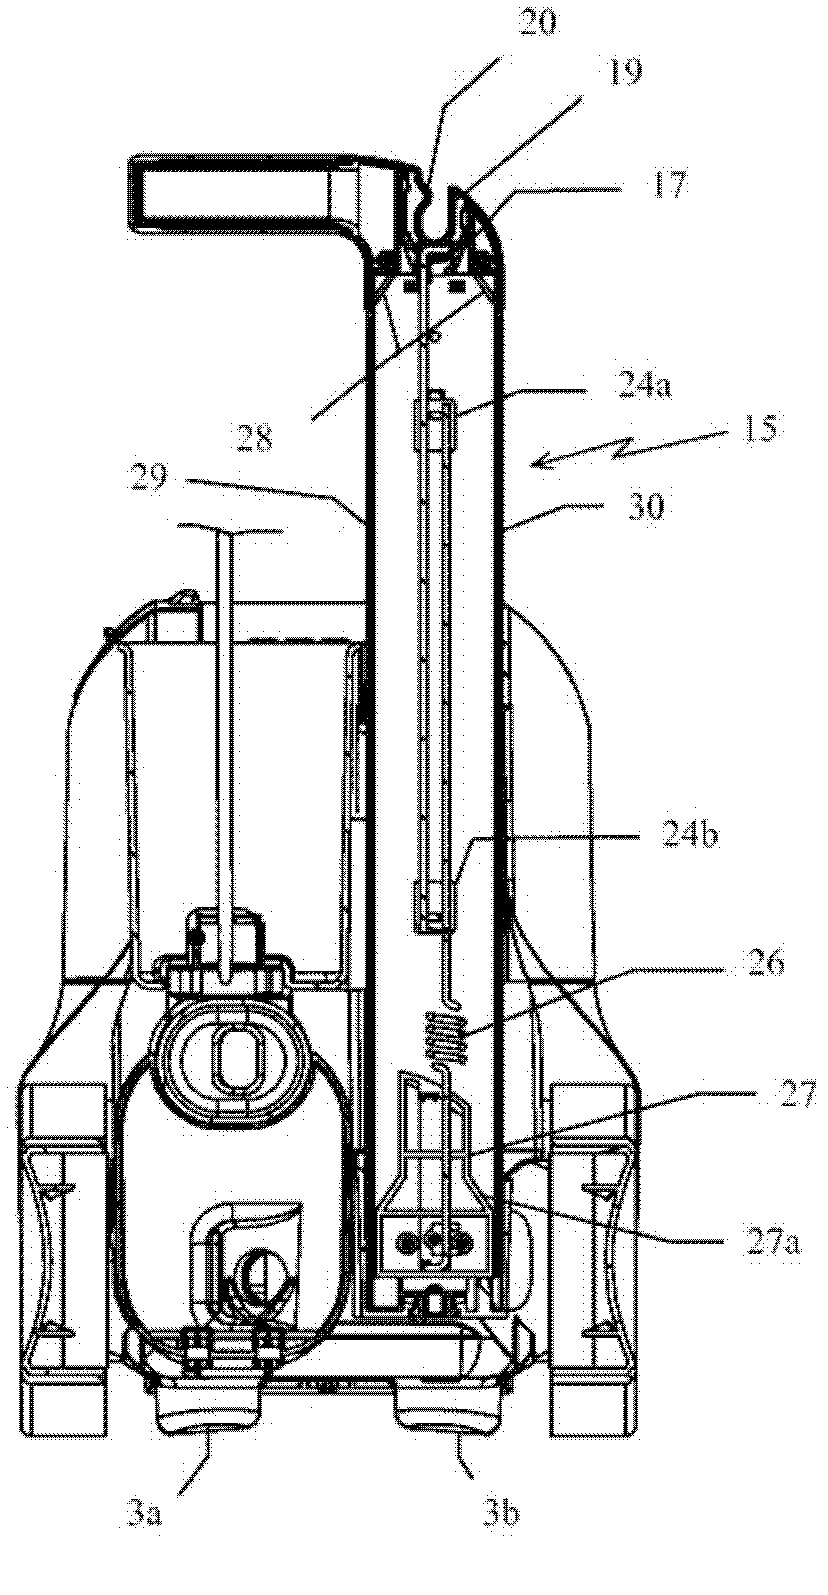 Ironing apparatus comprising an iron and a steam-generating base provided with a cord-guiding device